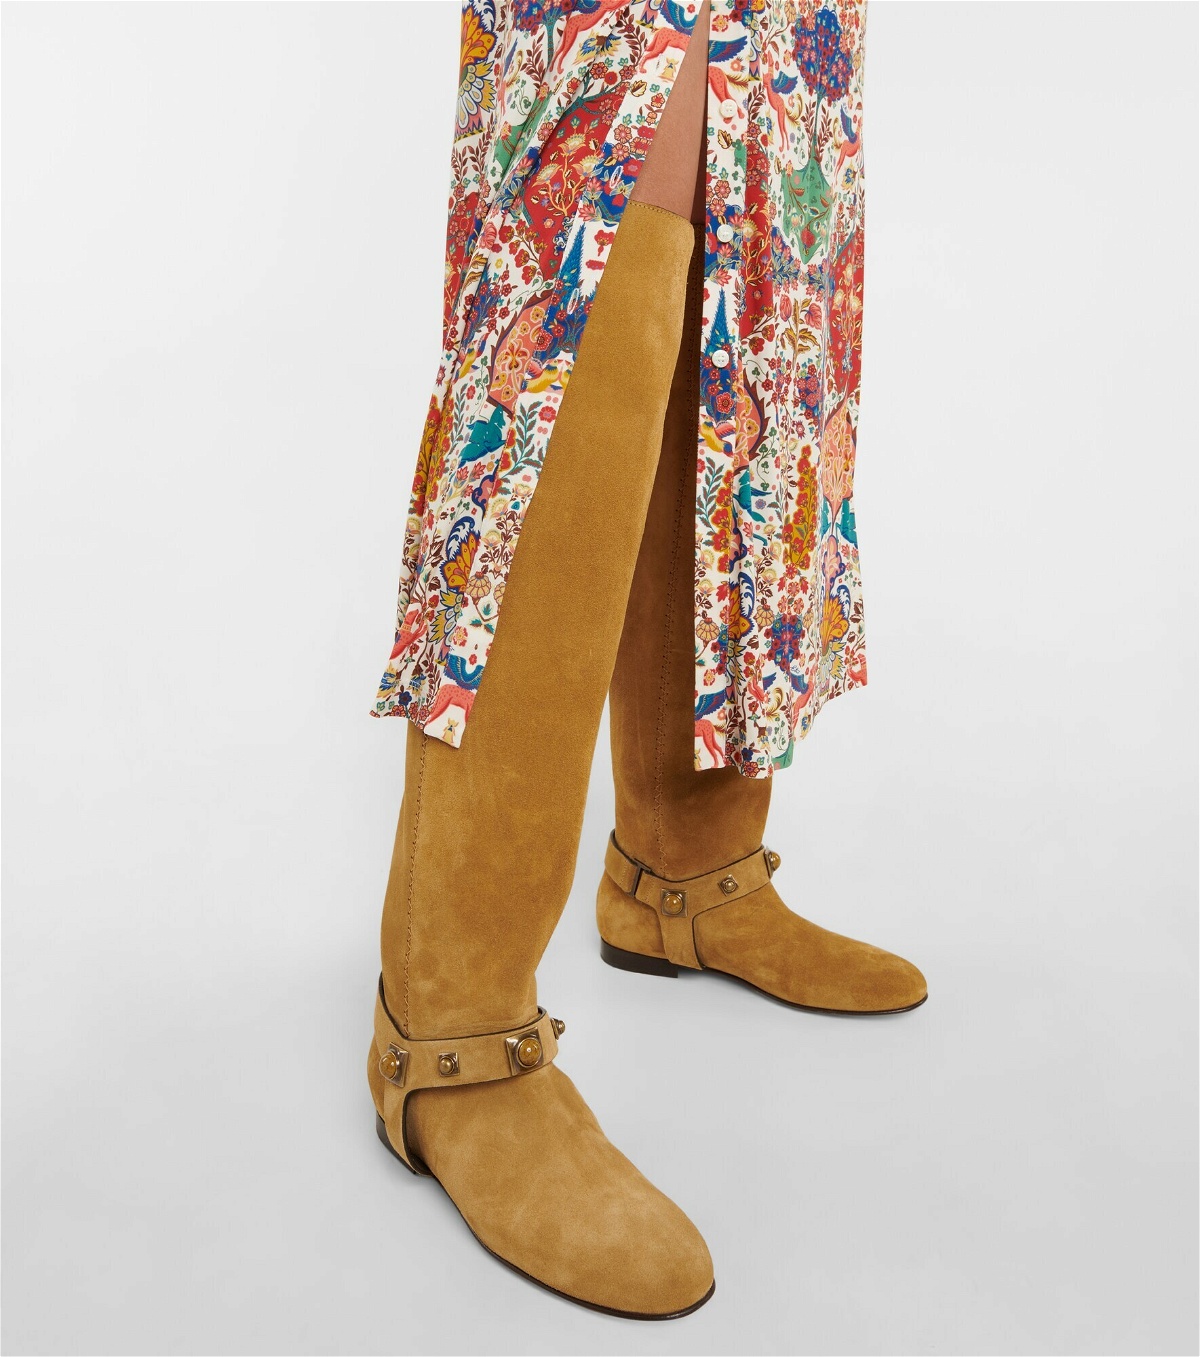 Etro - Crown Me suede knee-high boots Etro